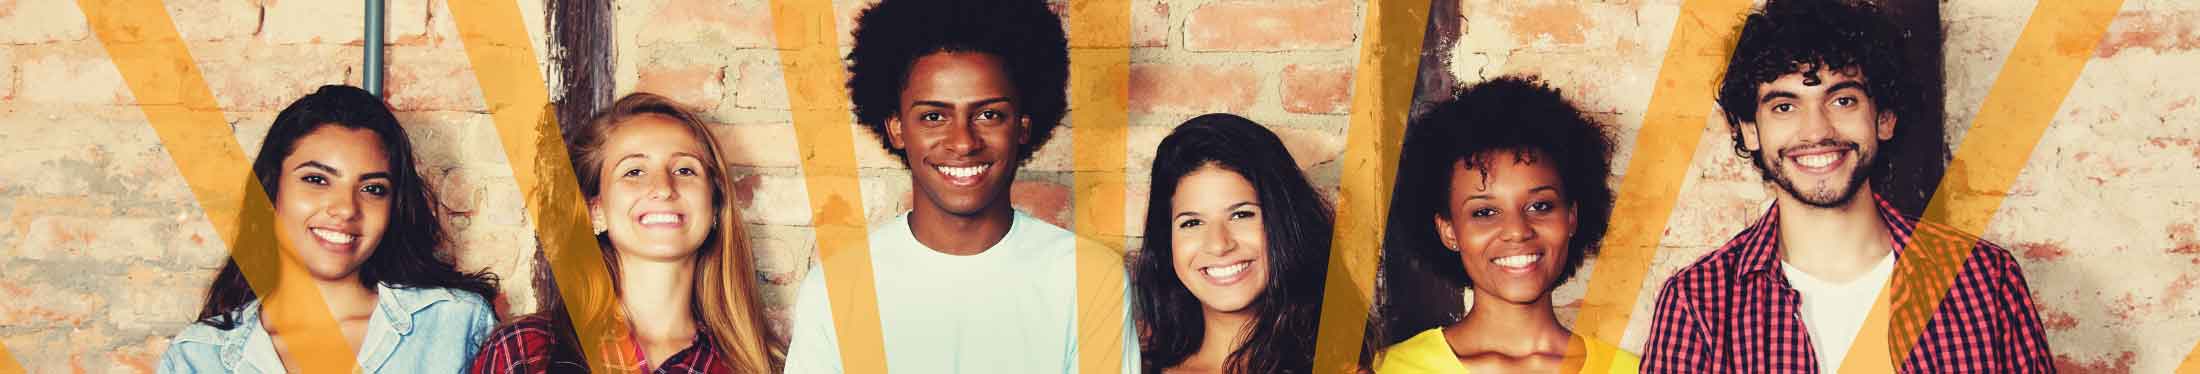 Photo: 6 diverse smiling teenagers